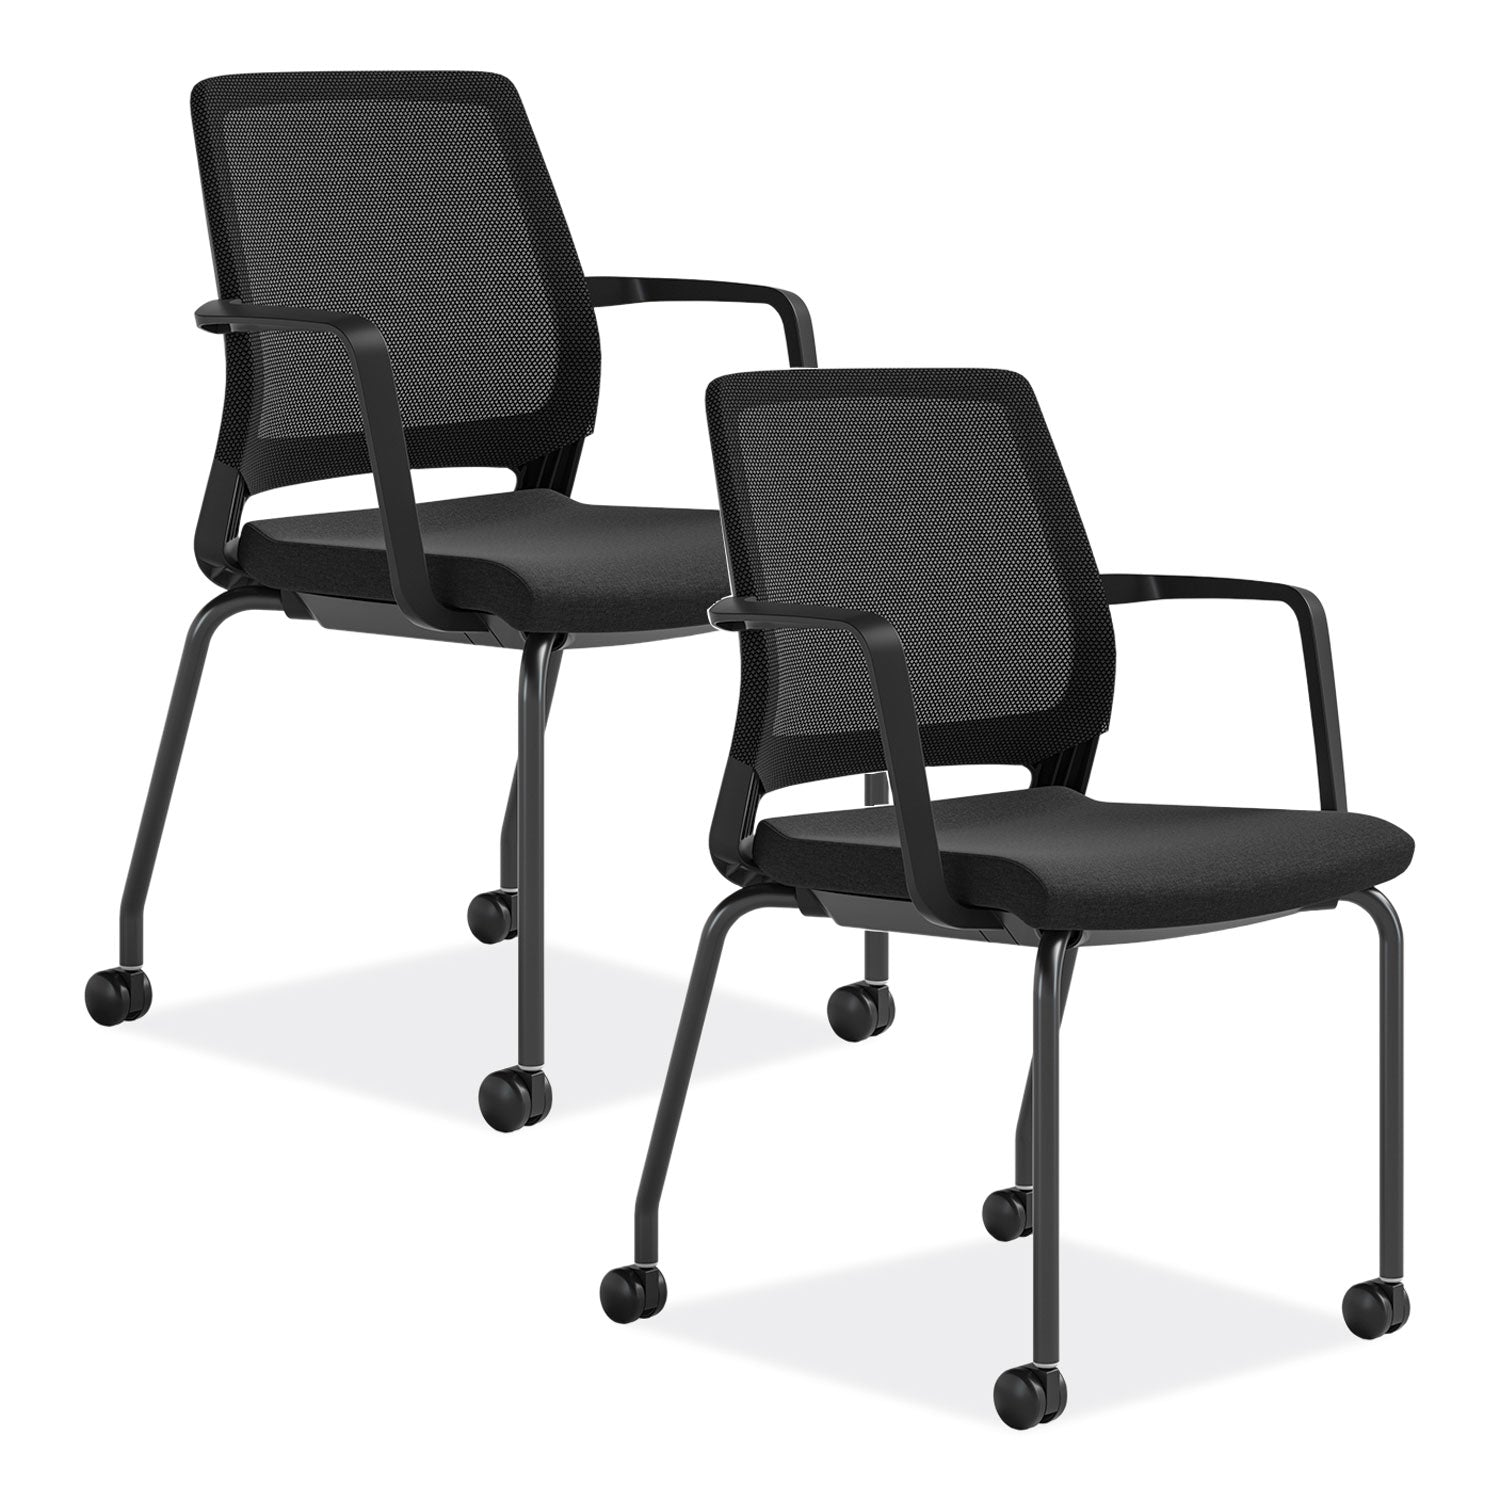 medina-guest-chair-supports-up-to-275-lb-18-seat-height-black-seat-back-base-ships-in-1-3-business-days_saf6829bl - 4